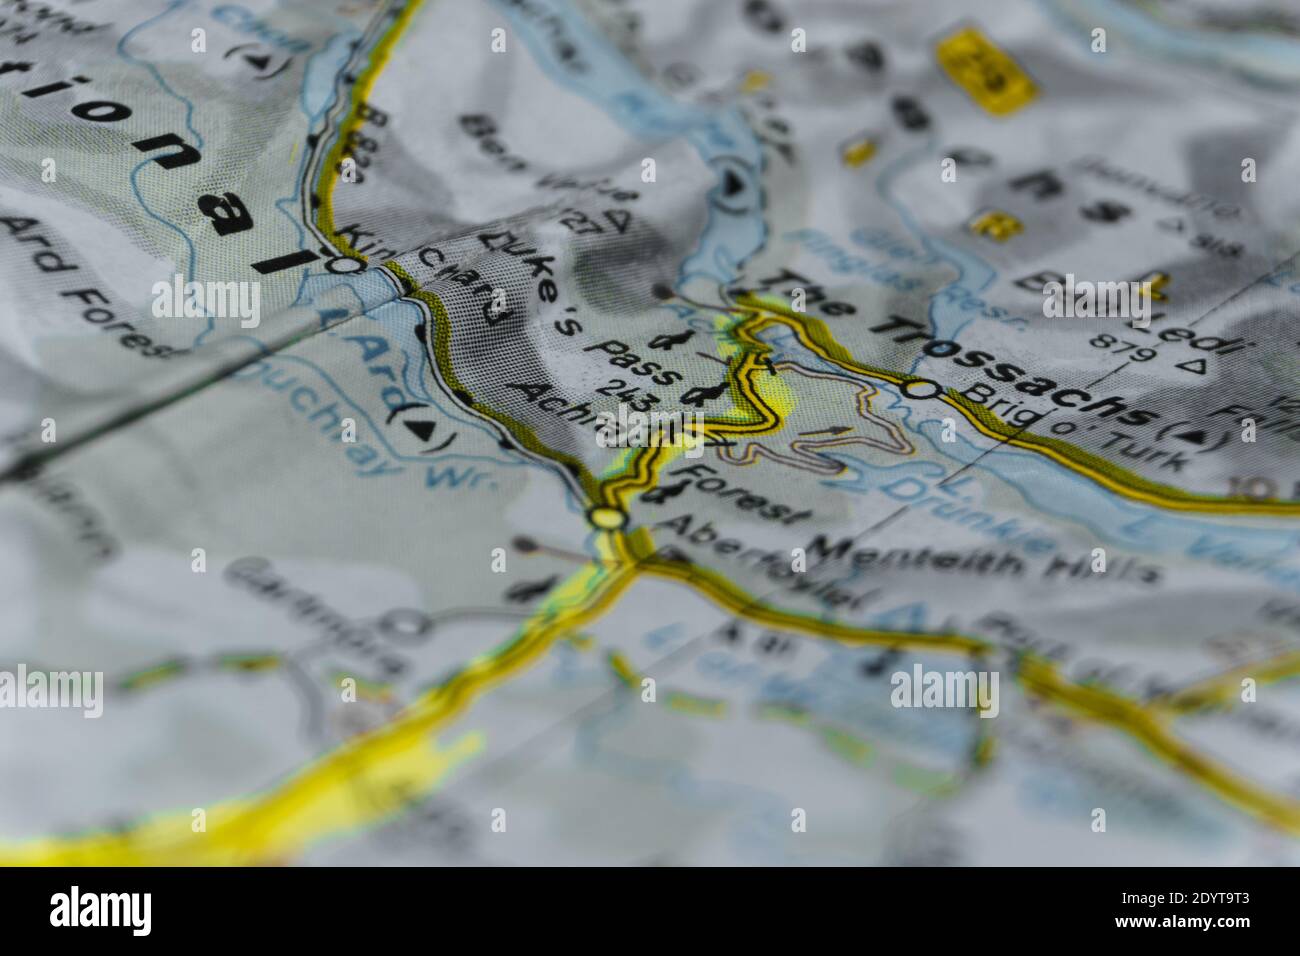 Detail of a road map of scotland marked with text marker area The Trossachs Stock Photo